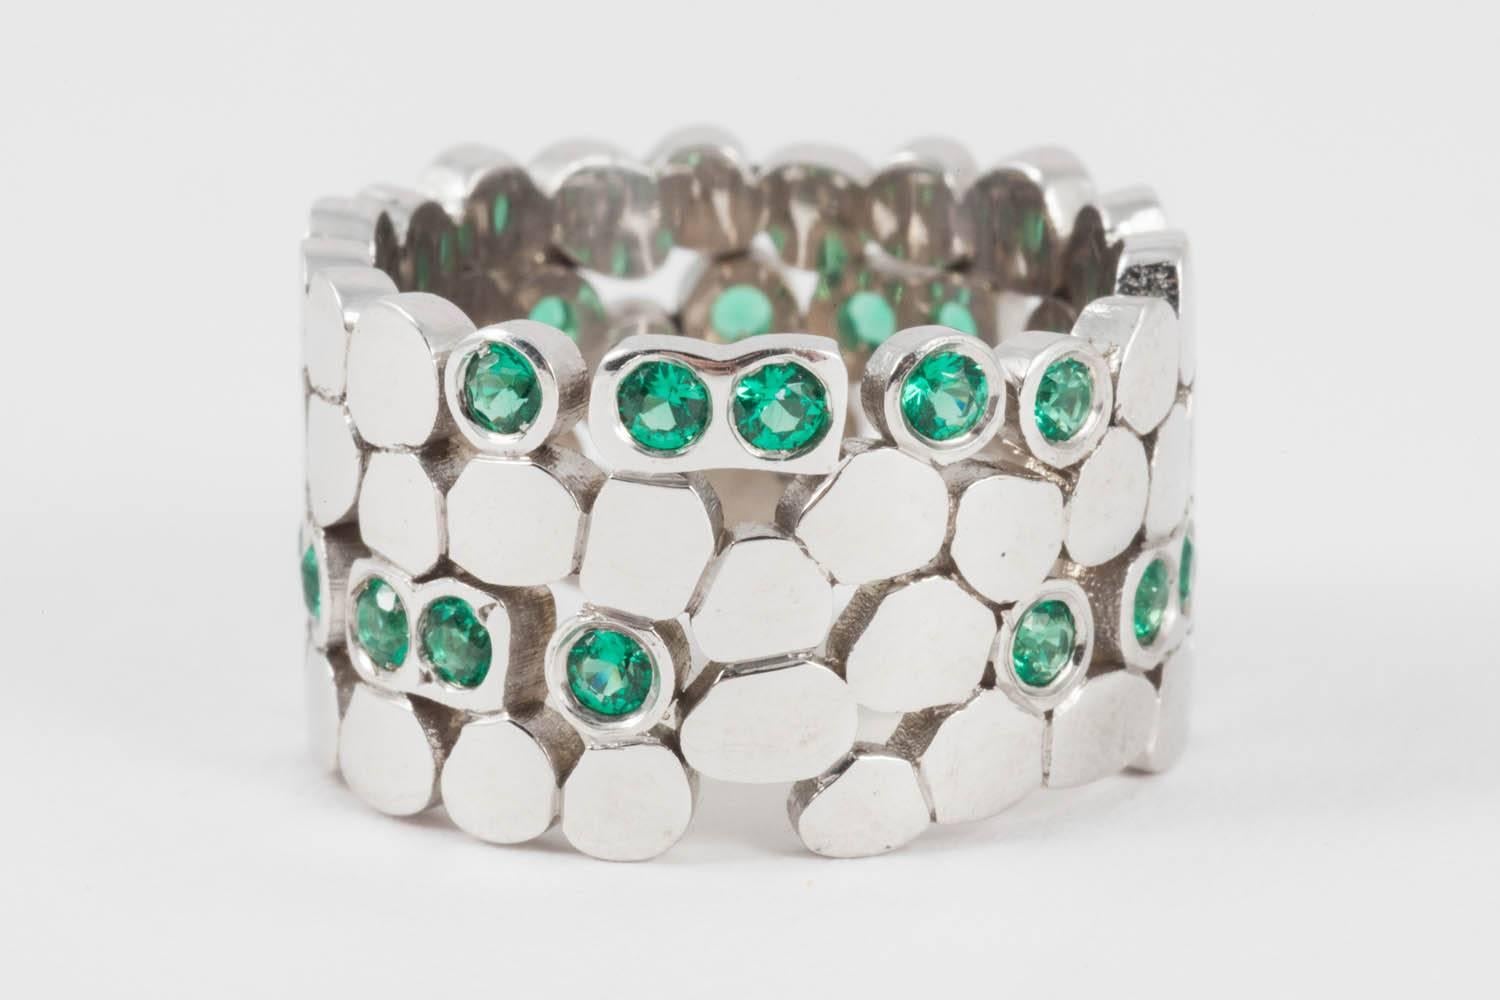 Code by Edge uses morse or binary code to hide hidden messages within the beautiful jewellery. This example is of a band ring and set with emeralds using the morse code to spell out the name "Claire". Set within the ring in emeralds are